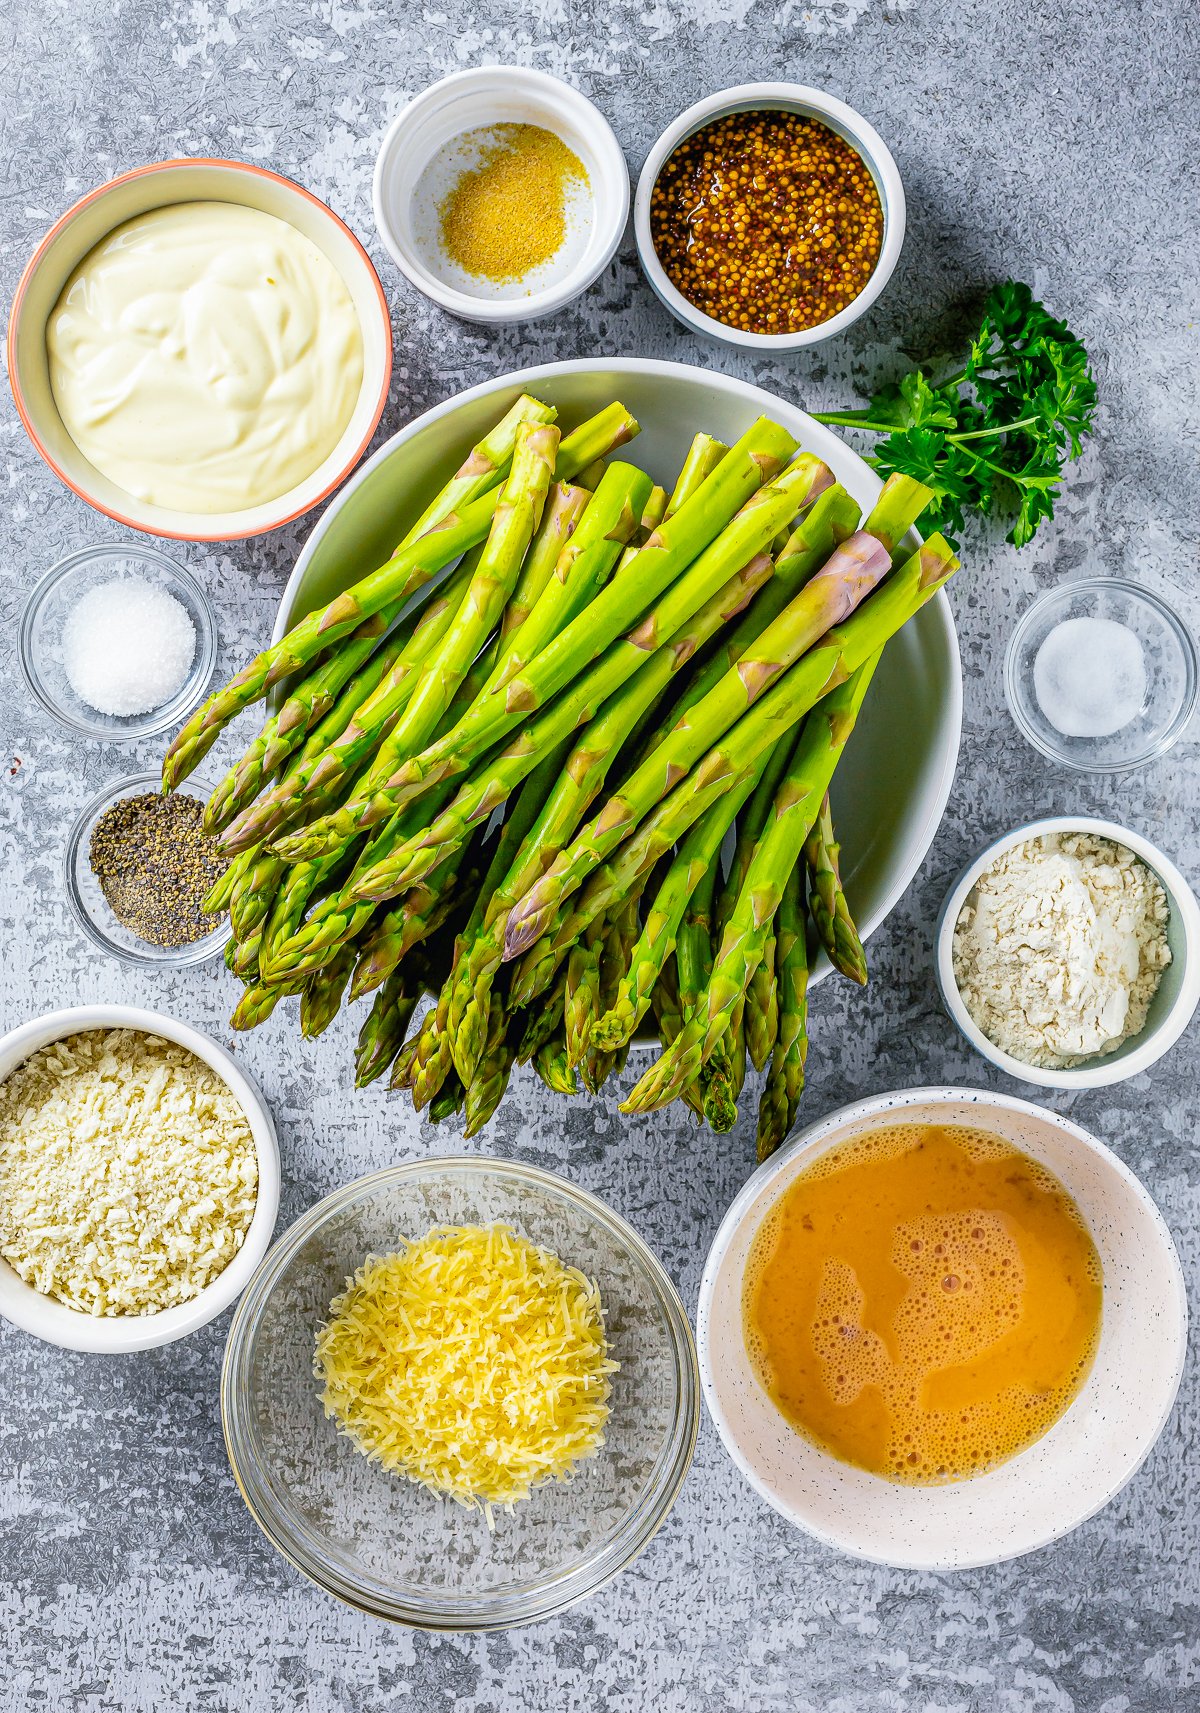 Ingredients needed to make Baked Asparagus Fries.